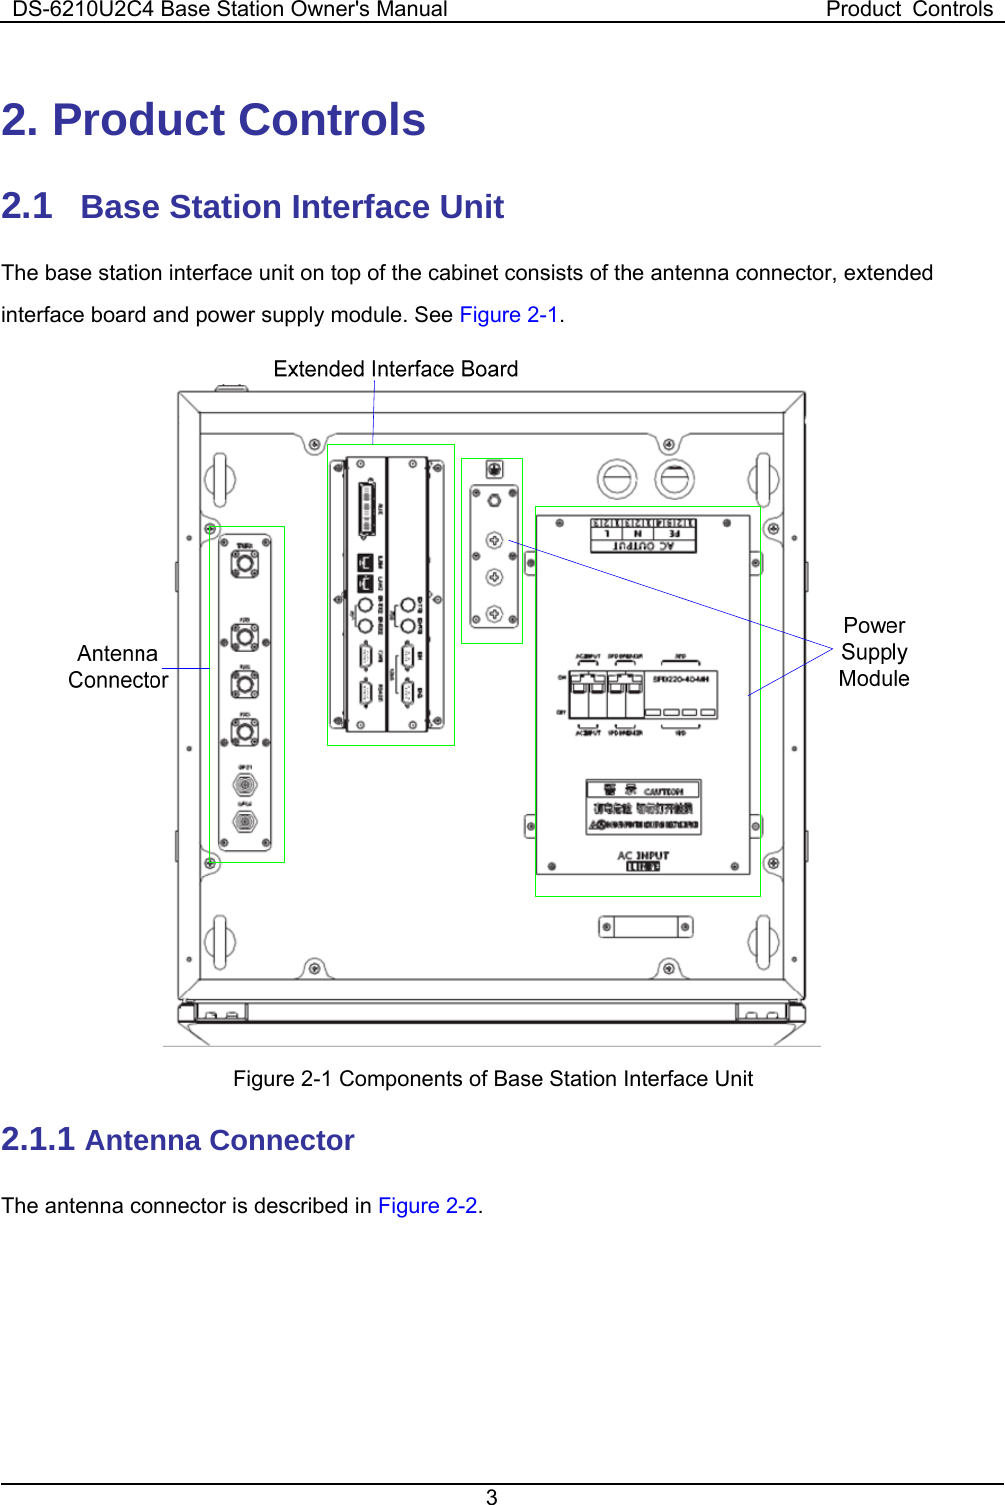 DS-6210U2C4 Base Station Owner&apos;s Manual  Product  Controls 3  2. Product Controls 2.1   Base Station Interface Unit   The base station interface unit on top of the cabinet consists of the antenna connector, extended interface board and power supply module. See Figure 2-1.  Figure 2-1 Components of Base Station Interface Unit 2.1.1 Antenna Connector The antenna connector is described in Figure 2-2.  